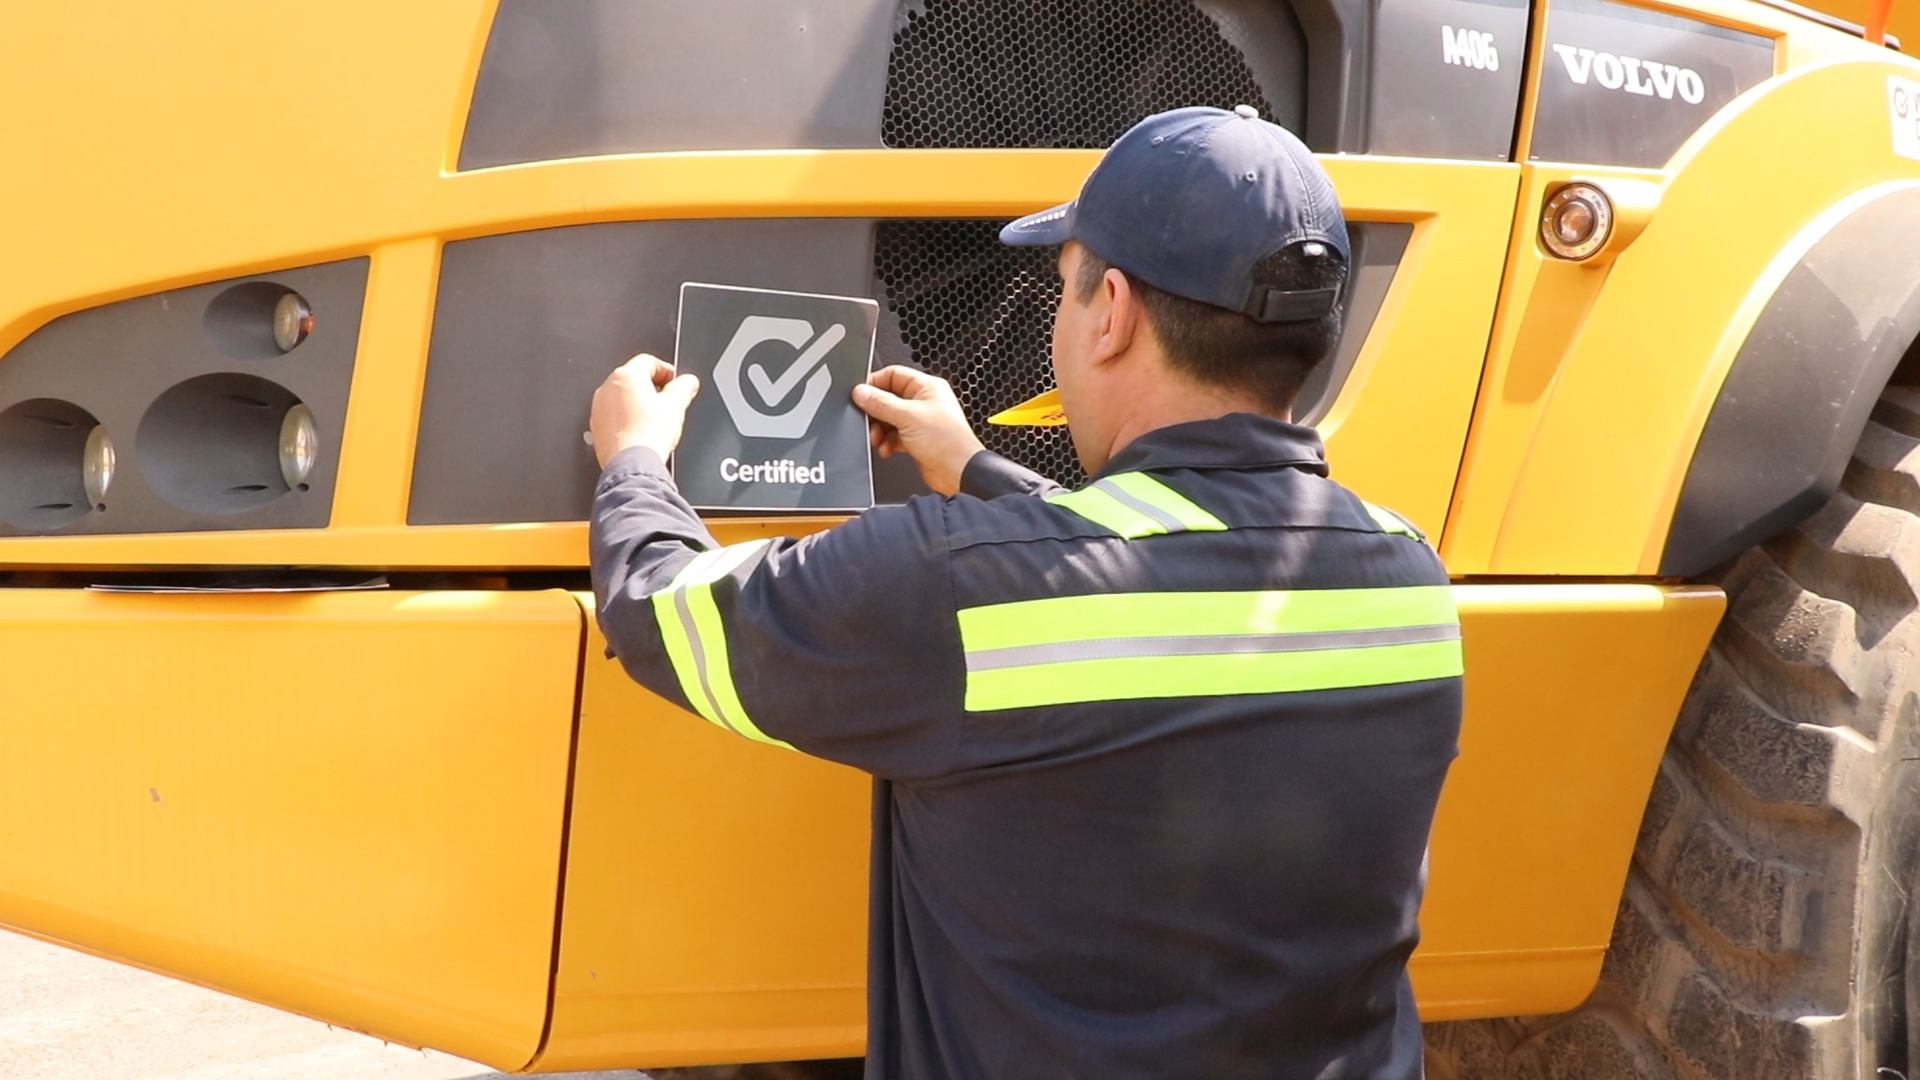 Certified sticker being placed on Volvo construction equipment